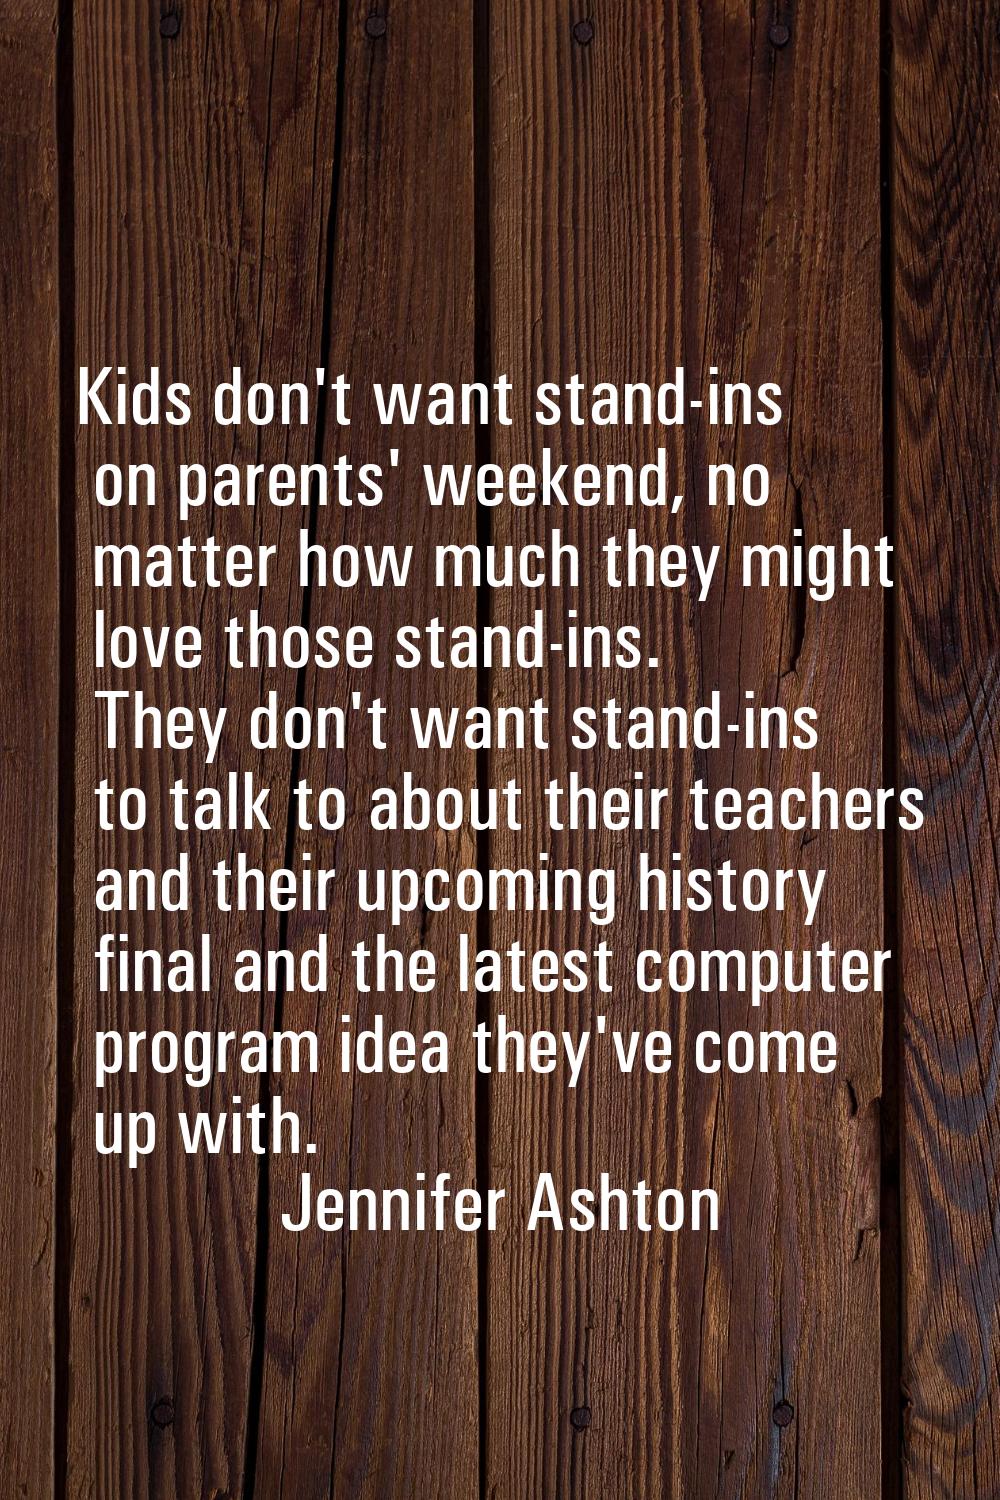 Kids don't want stand-ins on parents' weekend, no matter how much they might love those stand-ins. 